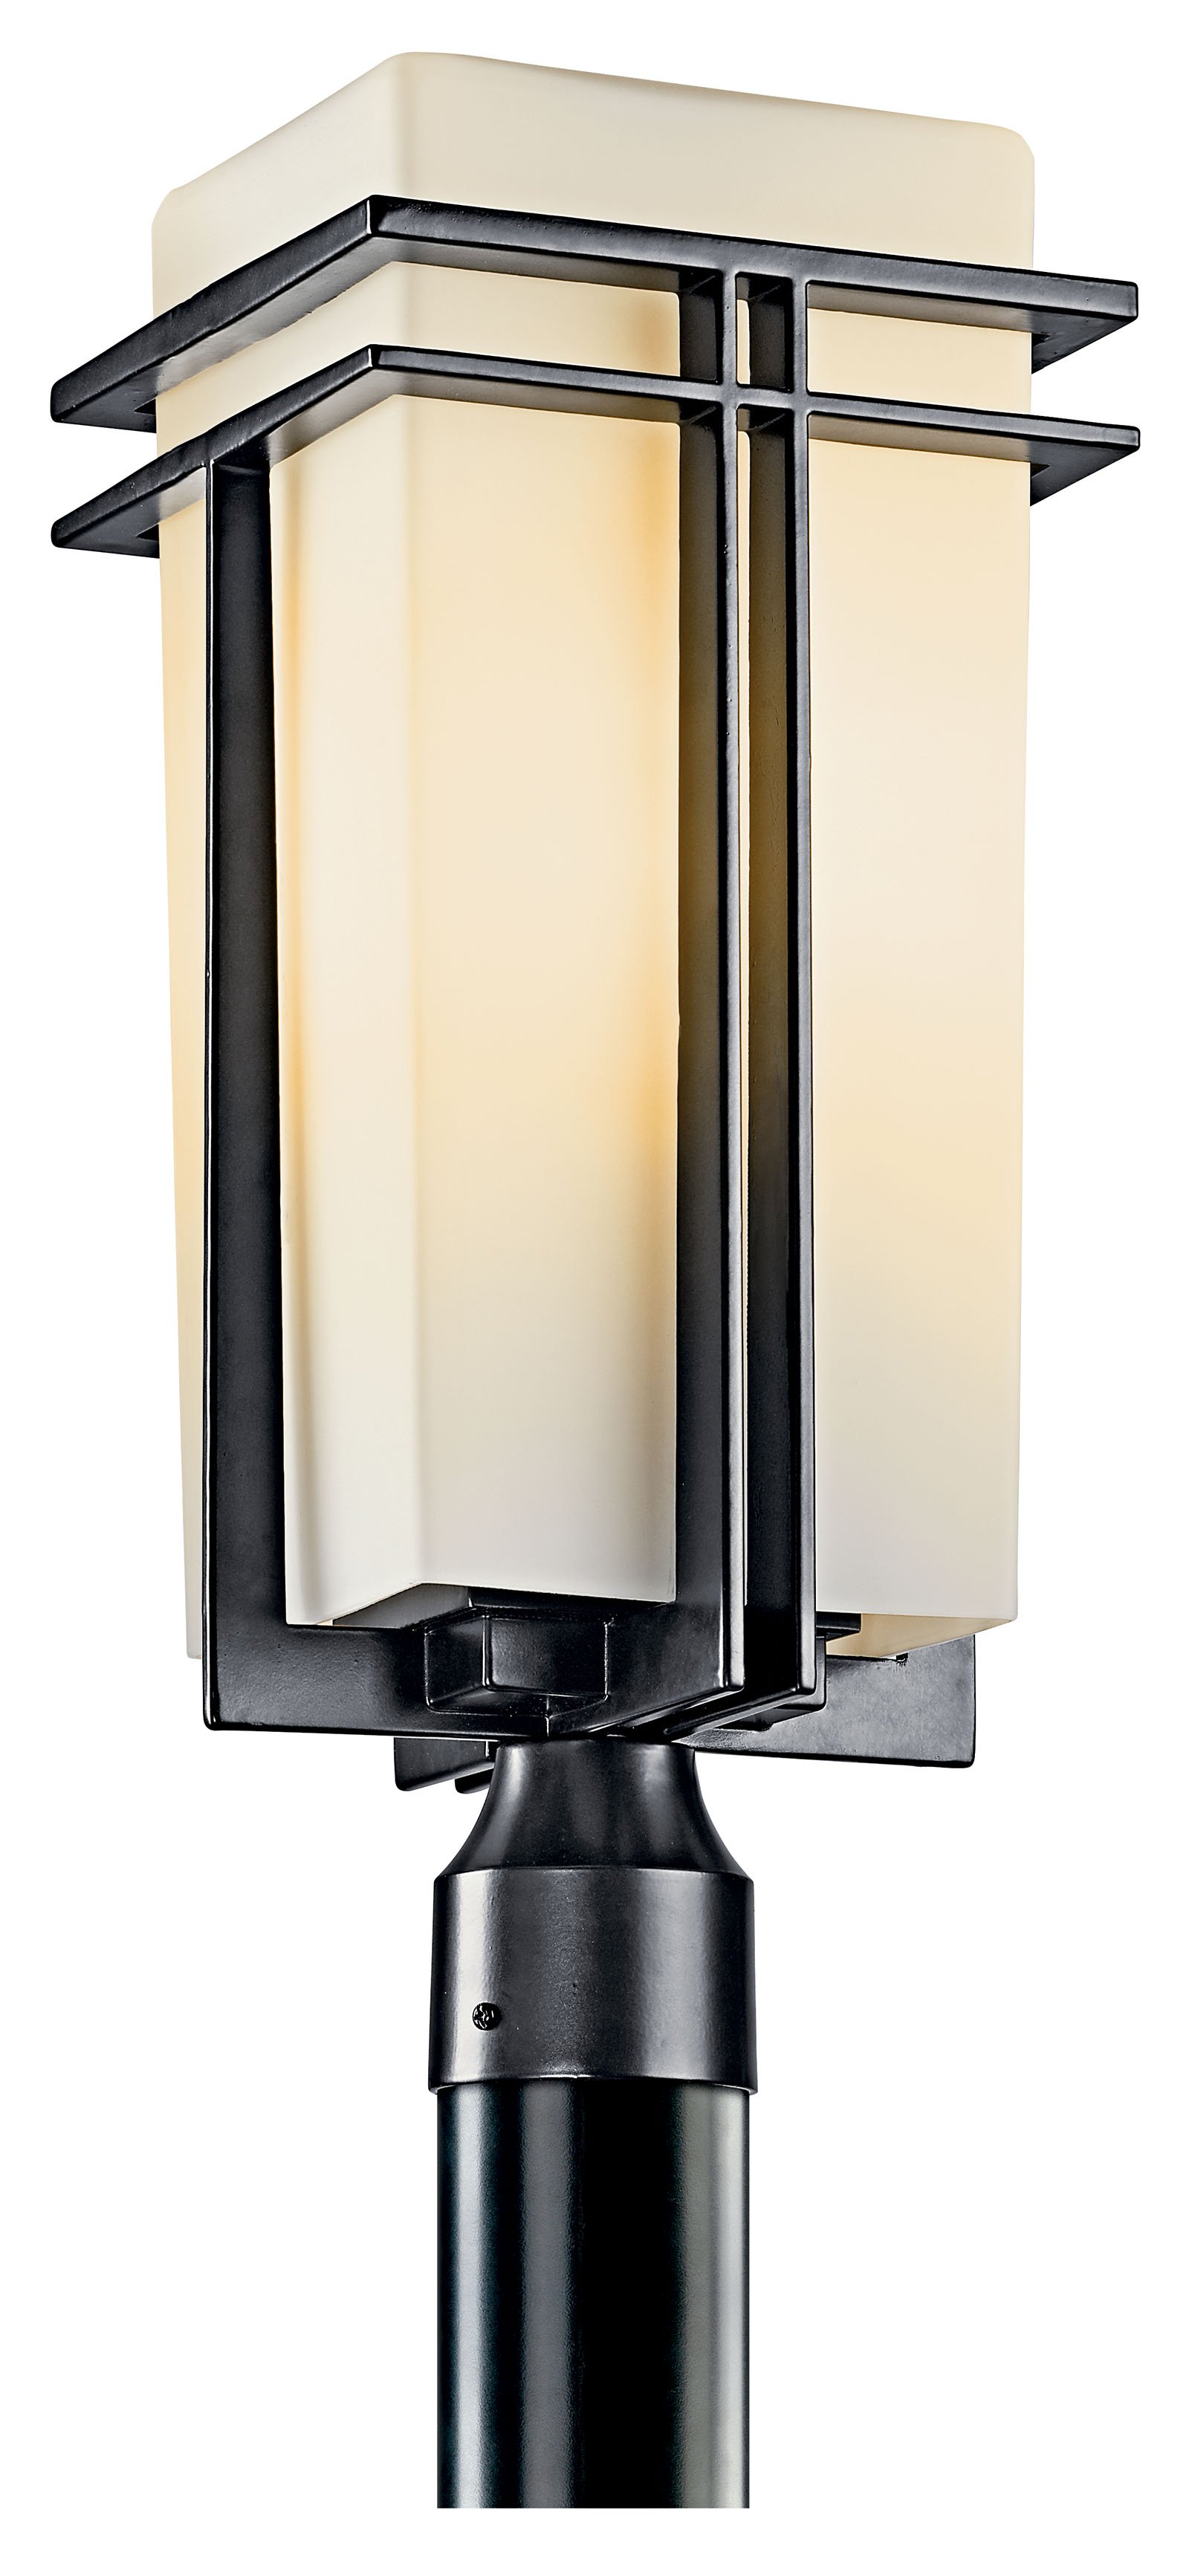 This 1 light mounted post from the Tremillo(TM) collection offers a smooth, clean profile. Double lines of Black finish form sleek perpendiculars that contrast well with the pleasant ambience of Satin Etched Cased Opal Glass. This design will mark any walkway or porch with sleek sophistication and well-balanced grandeur.